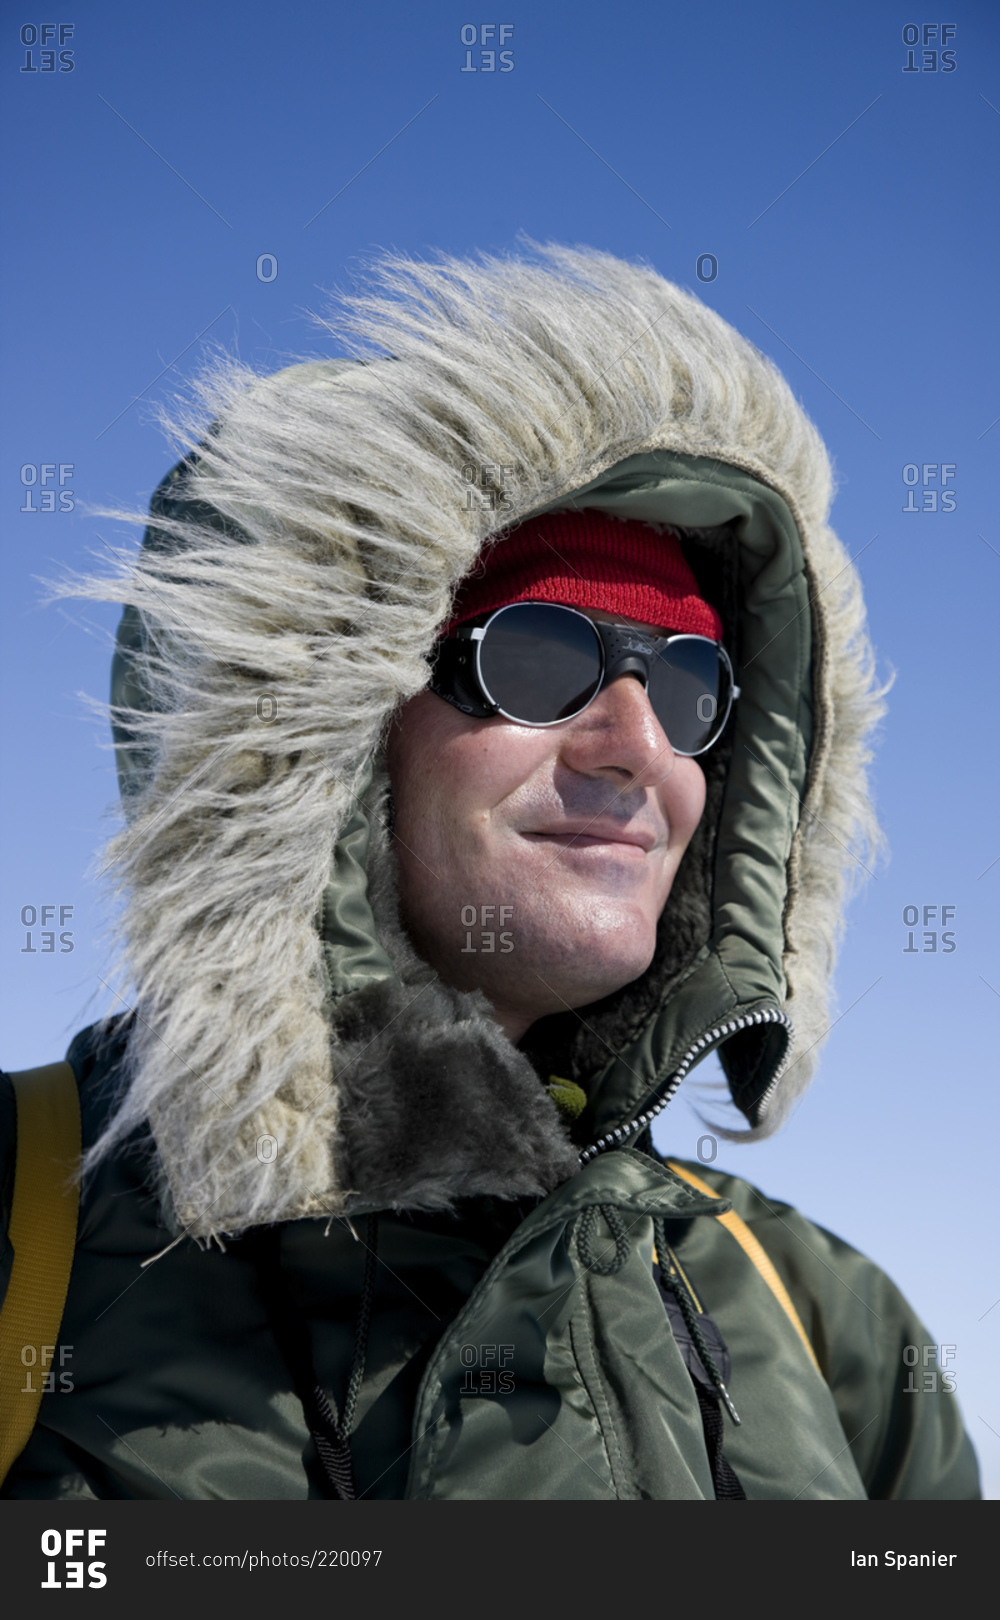 A man dressed for hiking in cold weather